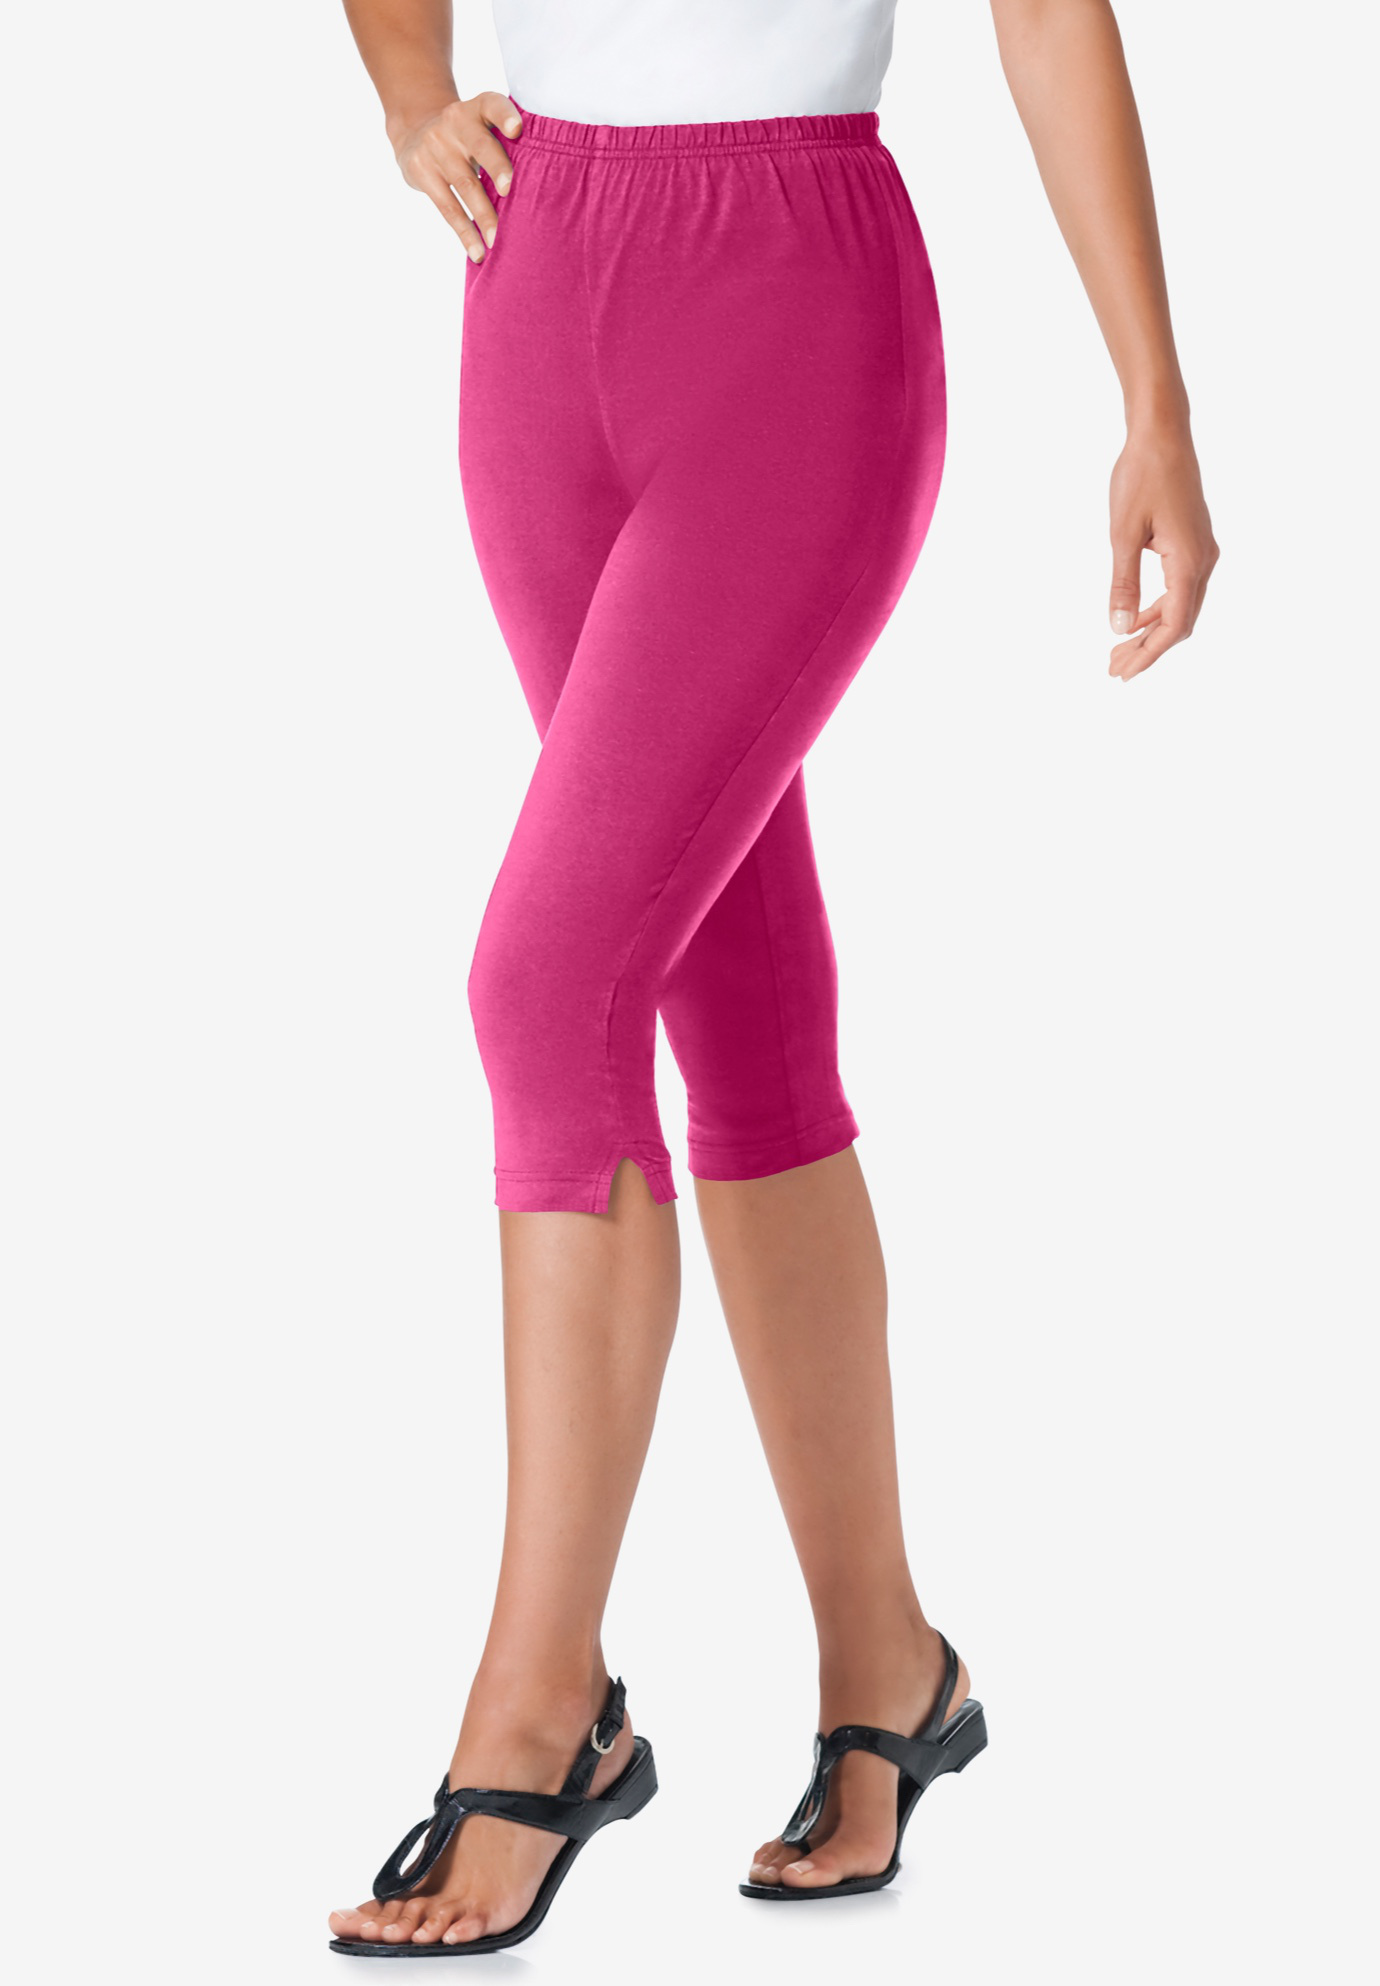 Women Details About Catherines Yoga Pants Womens 5xwp Stretch Relaxed Leggings Wide Waistband